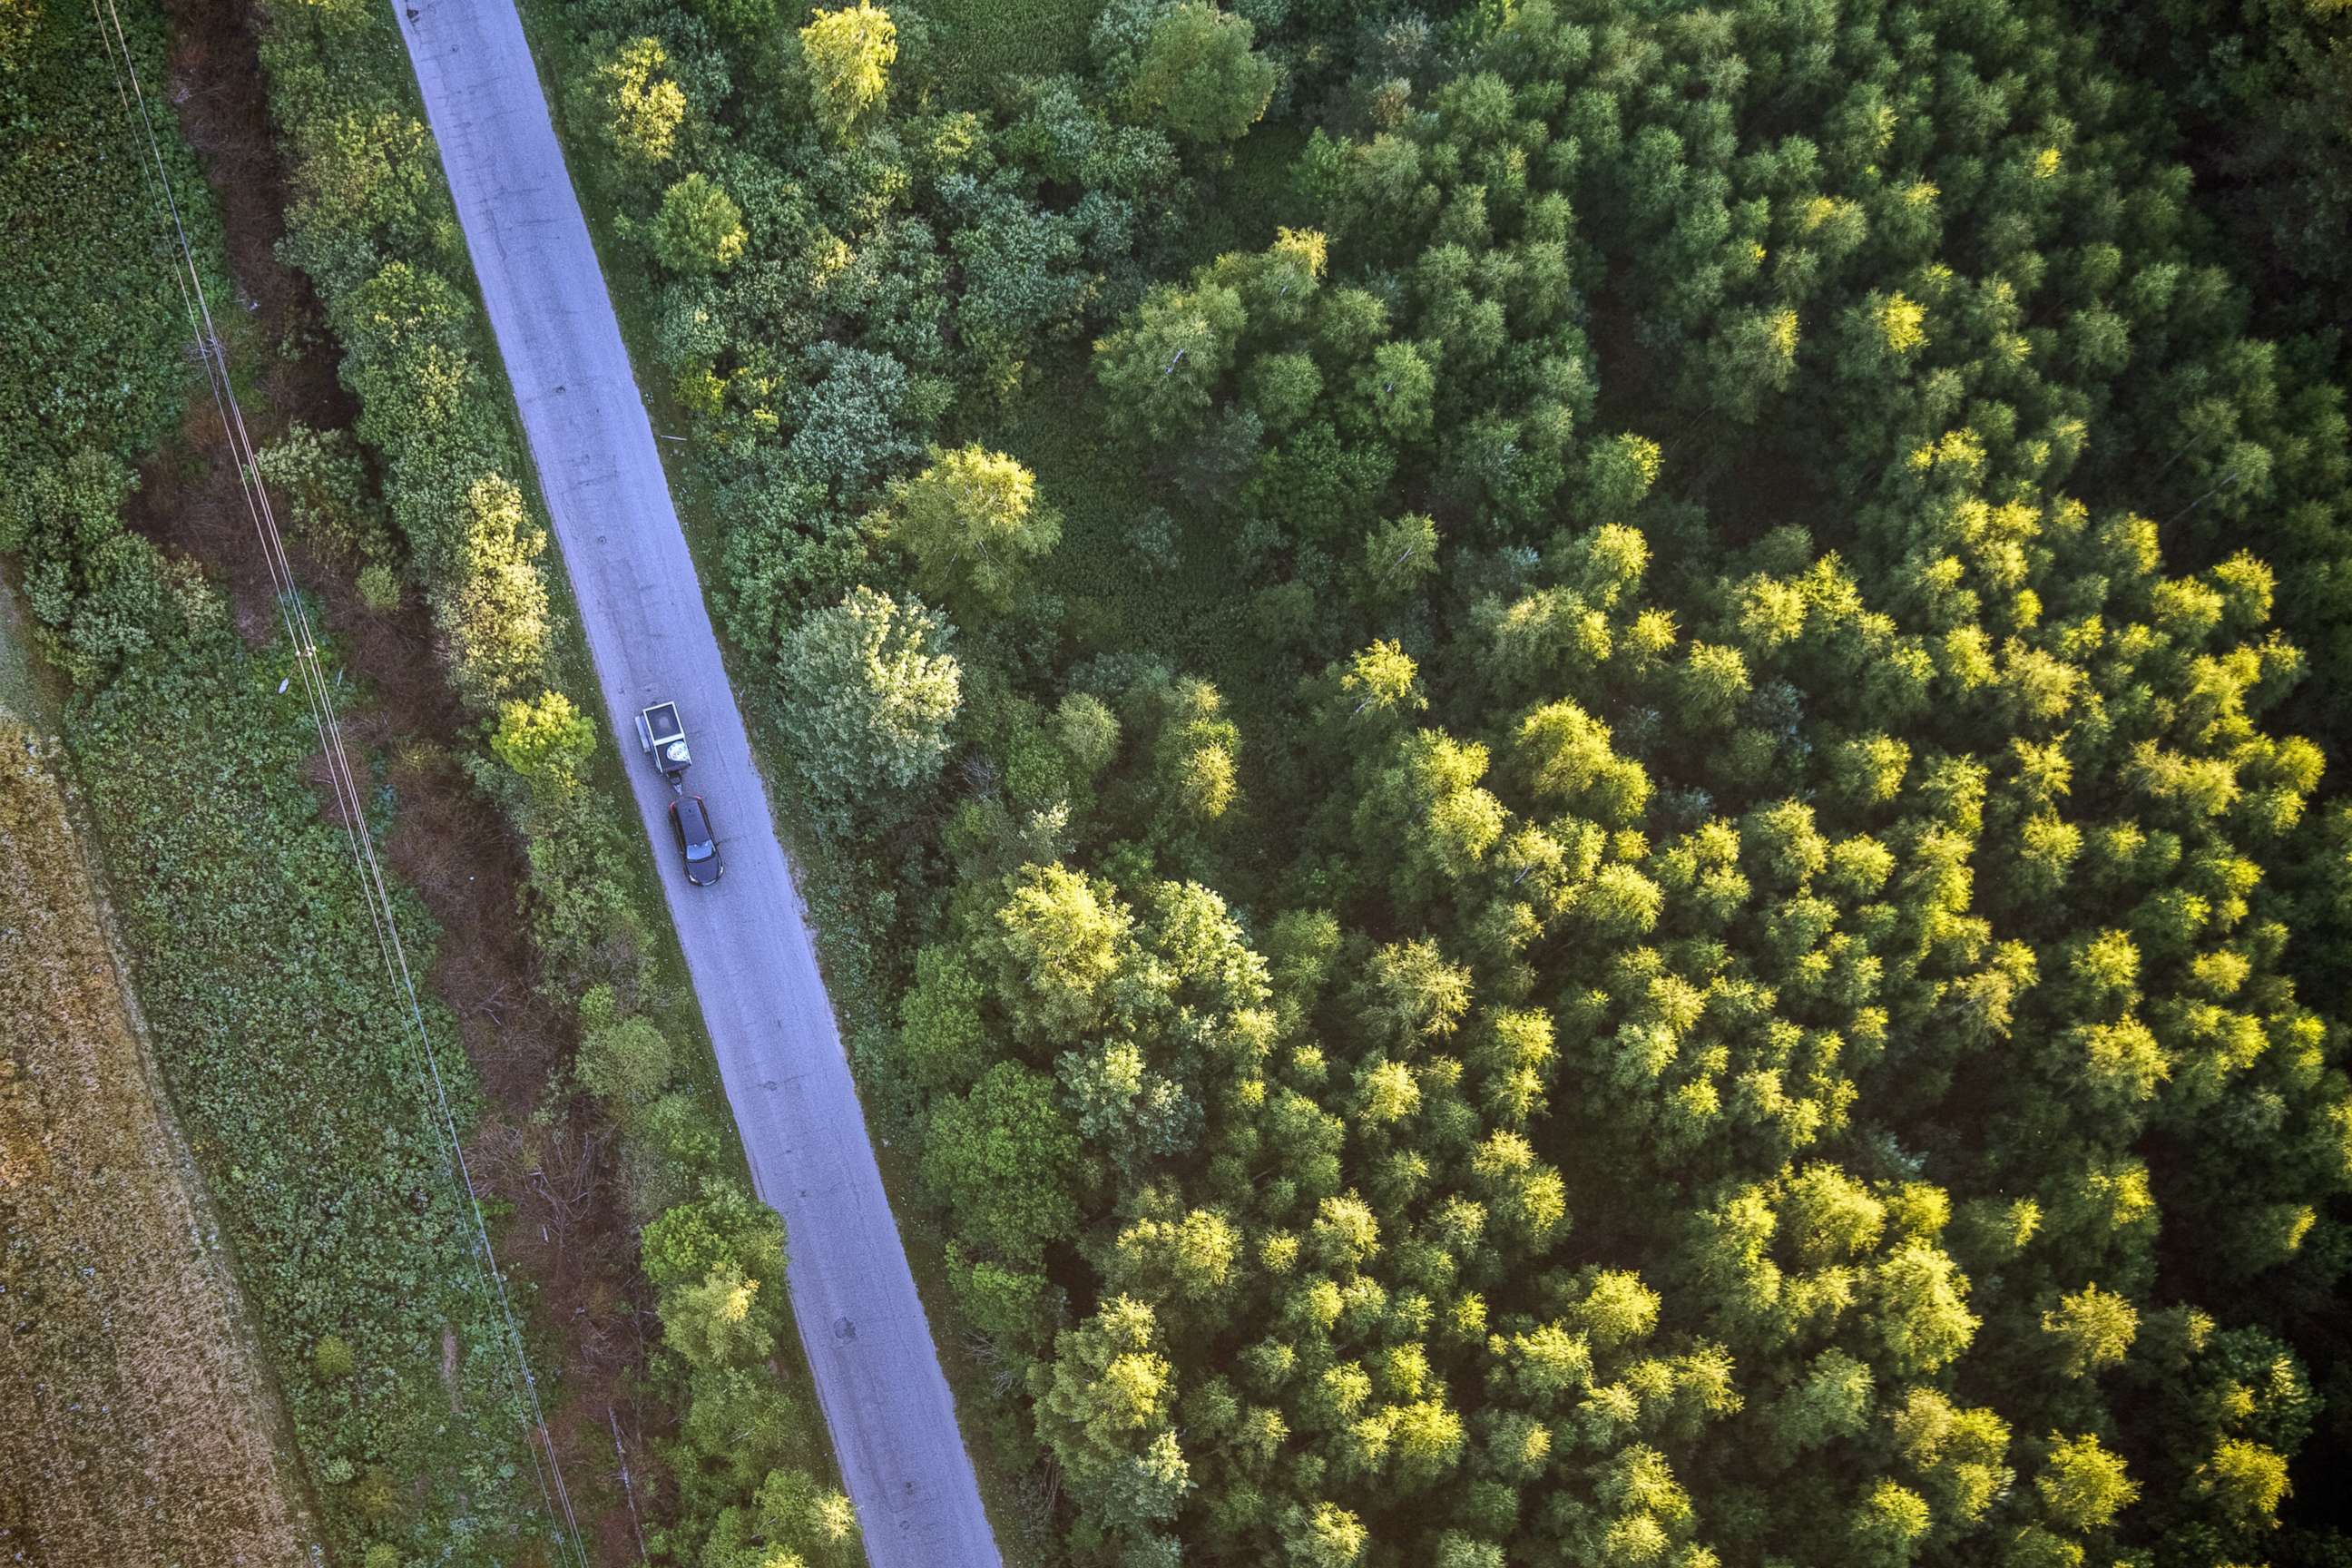 PHOTO: In this July 31, 2018, file photo, an aerial view of a motorway and a forest is shown in the Nizhny Novgorod region of Russia.